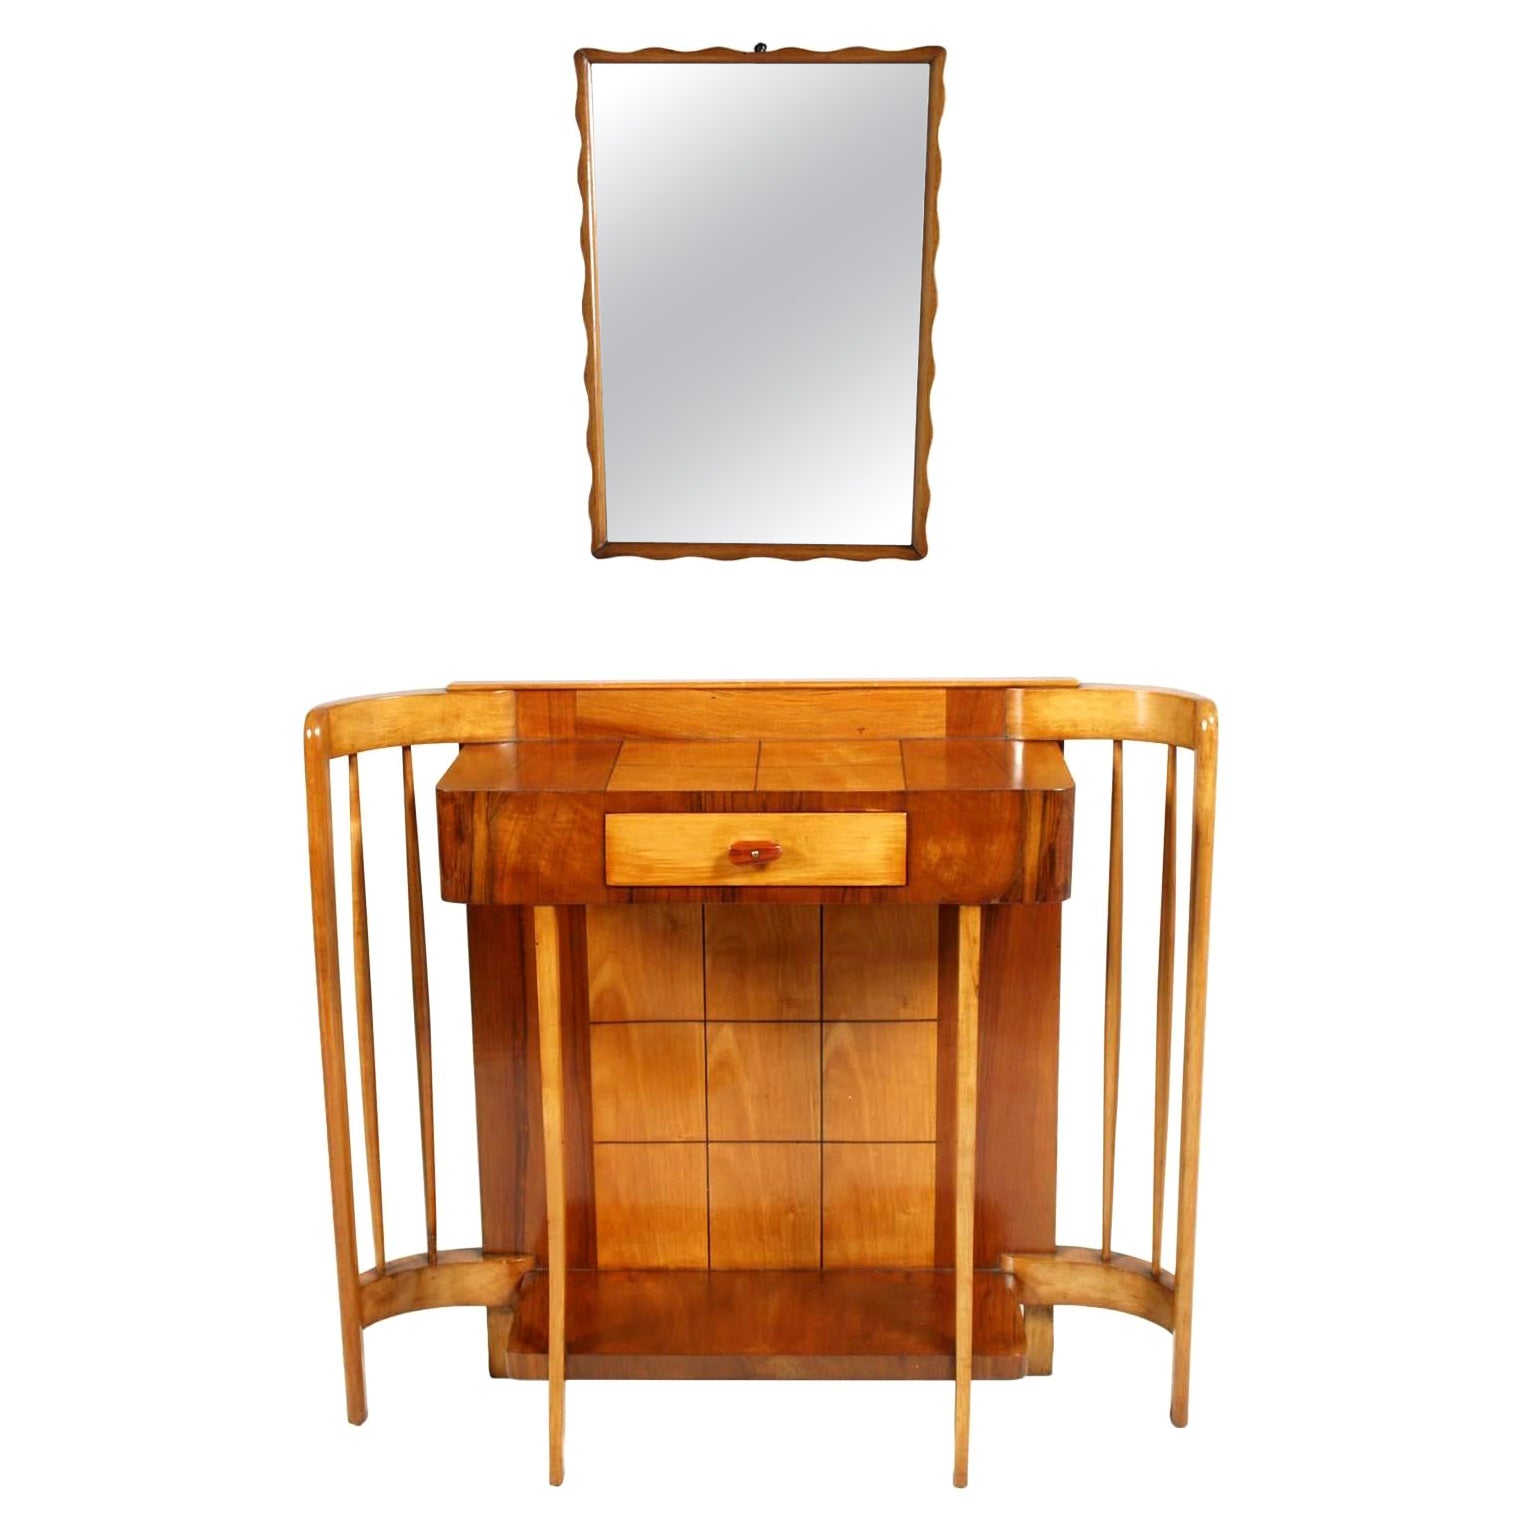 Mid Century Art Deco Console Mirror, Paolo Buffa Style, Wax Polished For Sale